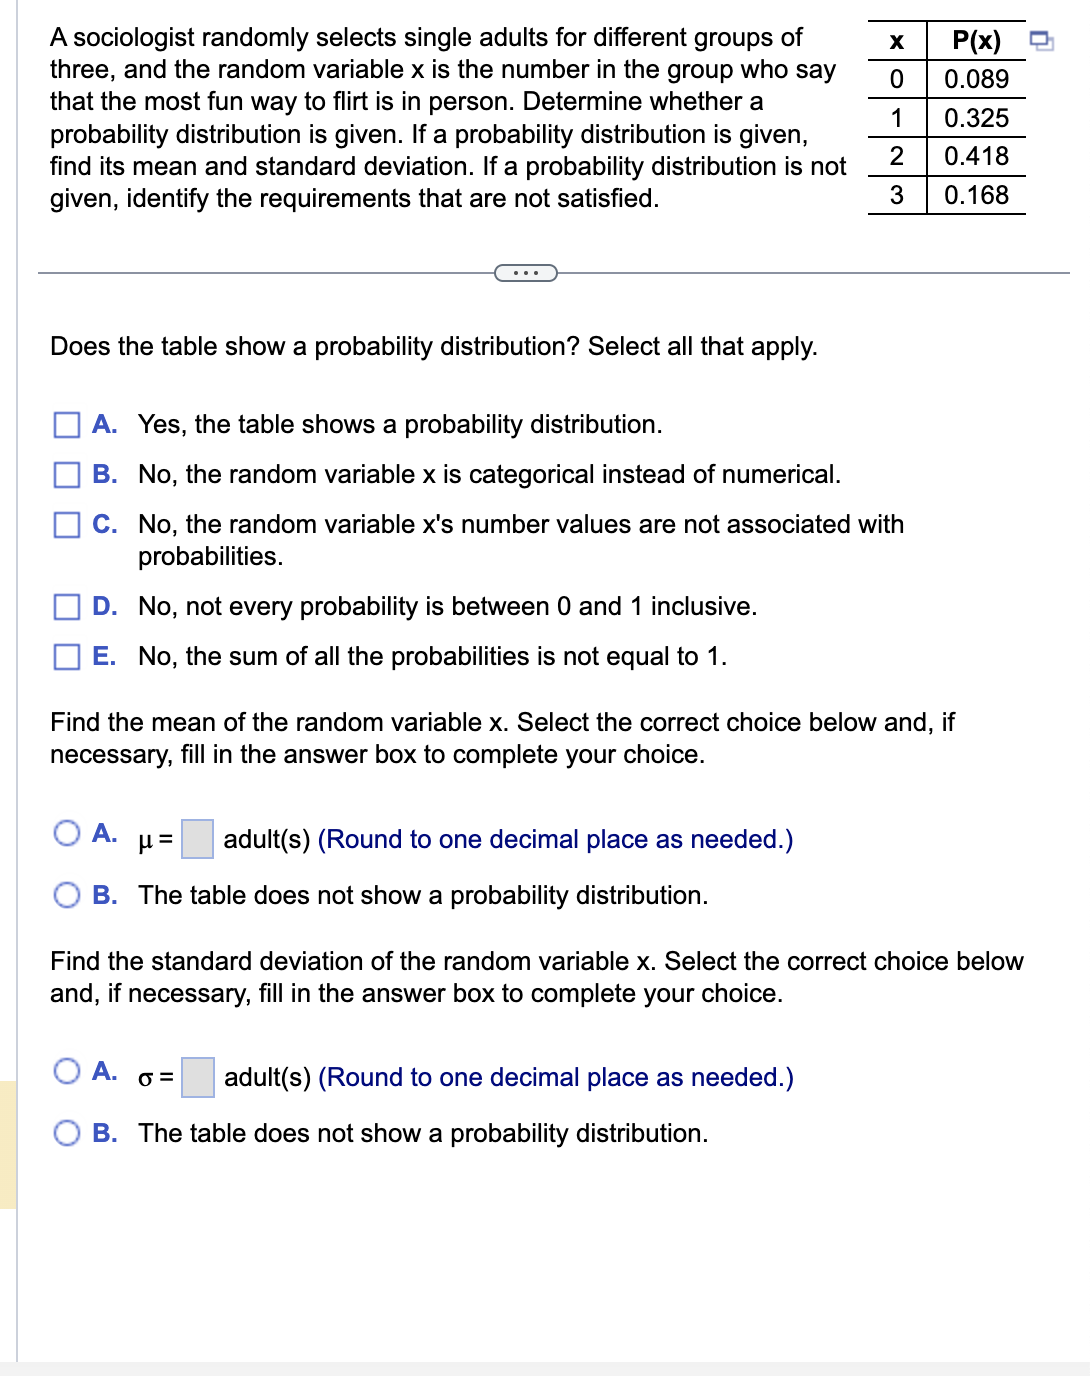 A sociologist randomly selects single adults for different groups of
three, and the random variable x is the number in the group who say
that the most fun way to flirt is in person. Determine whether a
probability distribution is given. If a probability distribution is given,
find its mean and standard deviation. If a probability distribution is not
given, identify the requirements that are not satisfied.
Does the table show a probability distribution? Select all that apply.
X
0
A. Yes, the table shows a probability distribution.
B. No, the random variable x is categorical instead of numerical.
C.
No, the random variable x's number values are not associated with
probabilities.
D. No, not every probability is between 0 and 1 inclusive.
E. No, the sum of all the probabilities is not equal to 1.
A. μ= adult(s) (Round to one decimal place as needed.)
B. The table does not show a probability distribution.
1
2
3
Find the mean of the random variable x. Select the correct choice below and, if
necessary, fill in the answer box to complete your choice.
A.
0= adult(s) (Round to one decimal place as needed.)
B. The table does not show a probability distribution.
P(x)
0.089
0.325
0.418
0.168
Find the standard deviation of the random variable x. Select the correct choice below
and, if necessary, fill in the answer box to complete your choice.